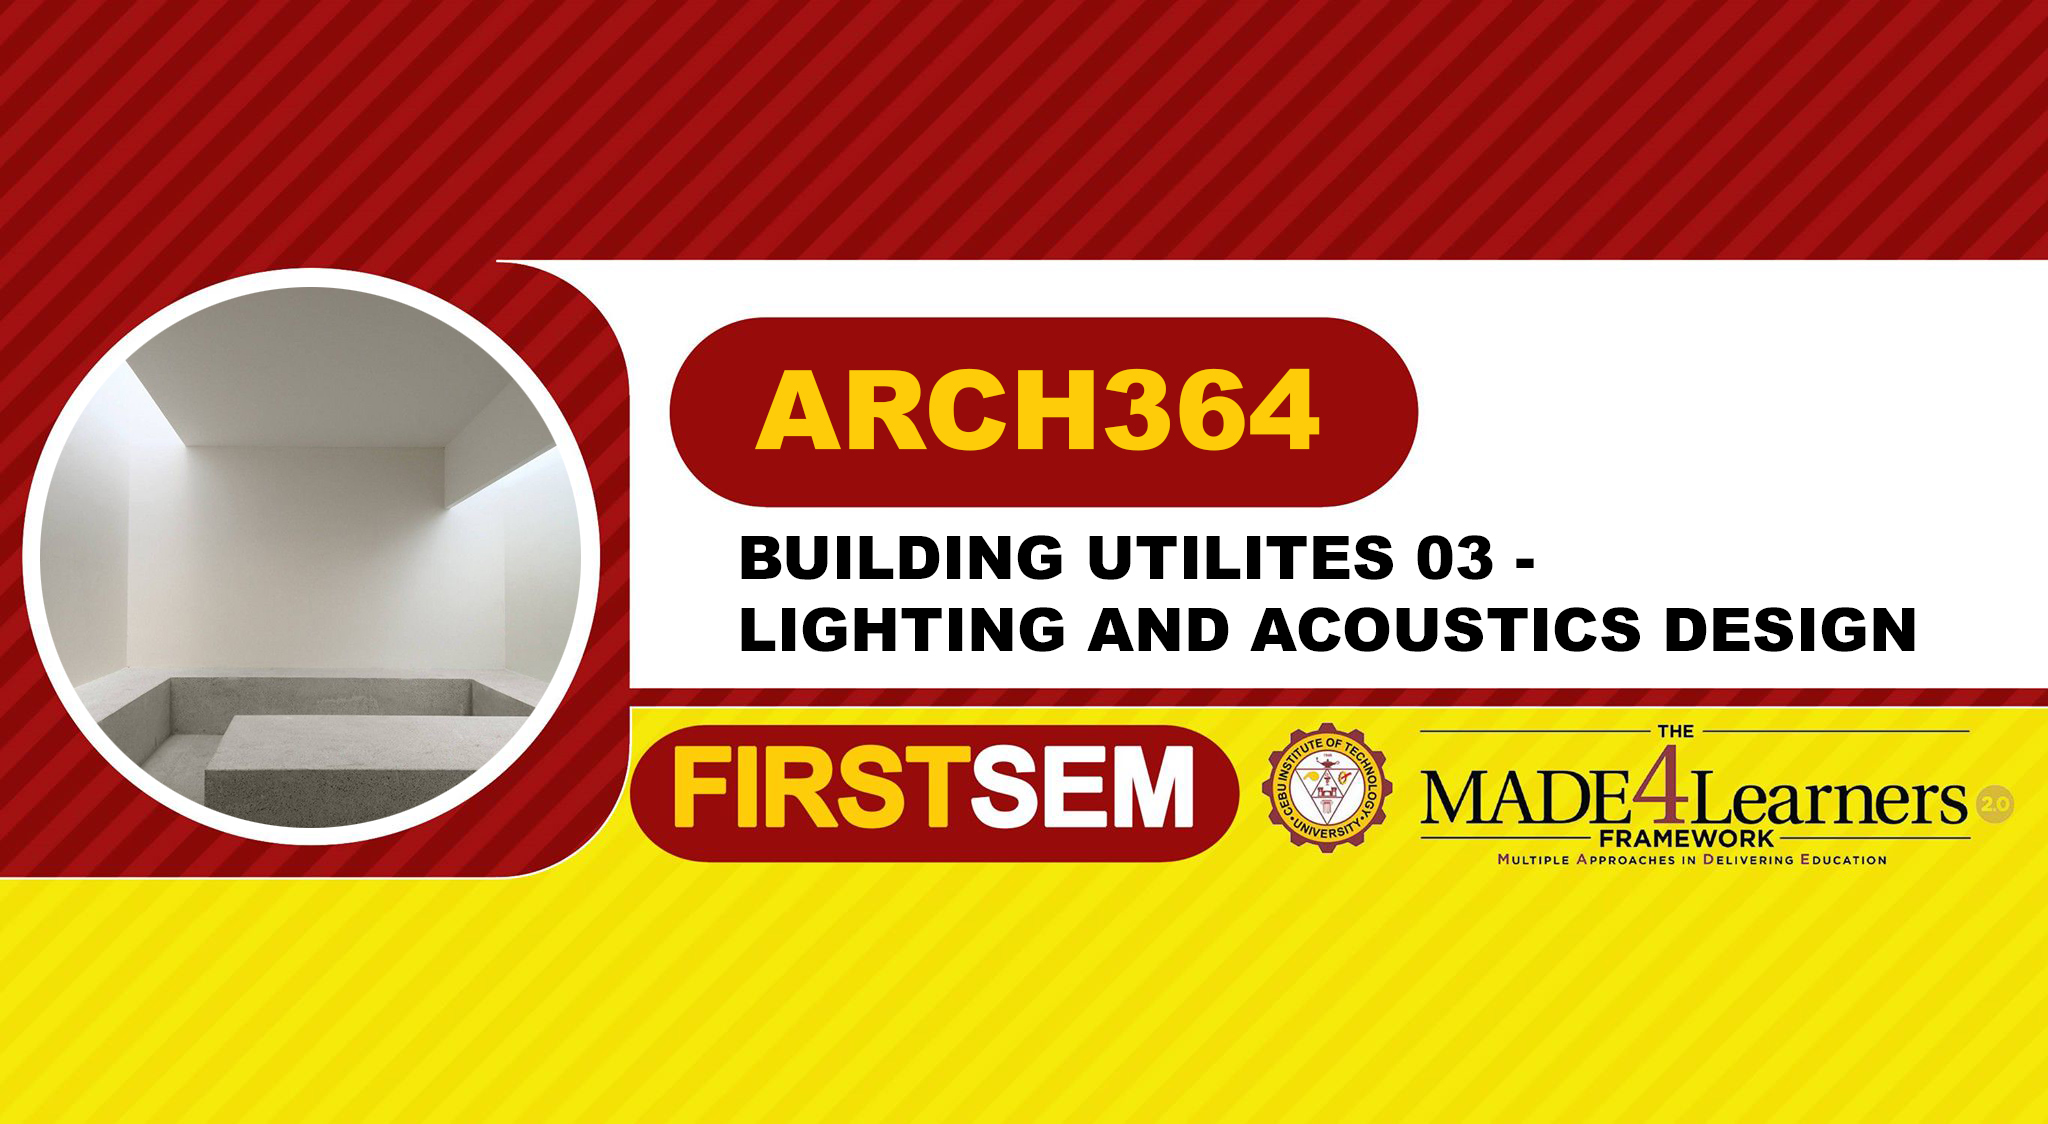 ARCH364: BUILDING UTILITIES 3 - Acoustics and Lighting Systems